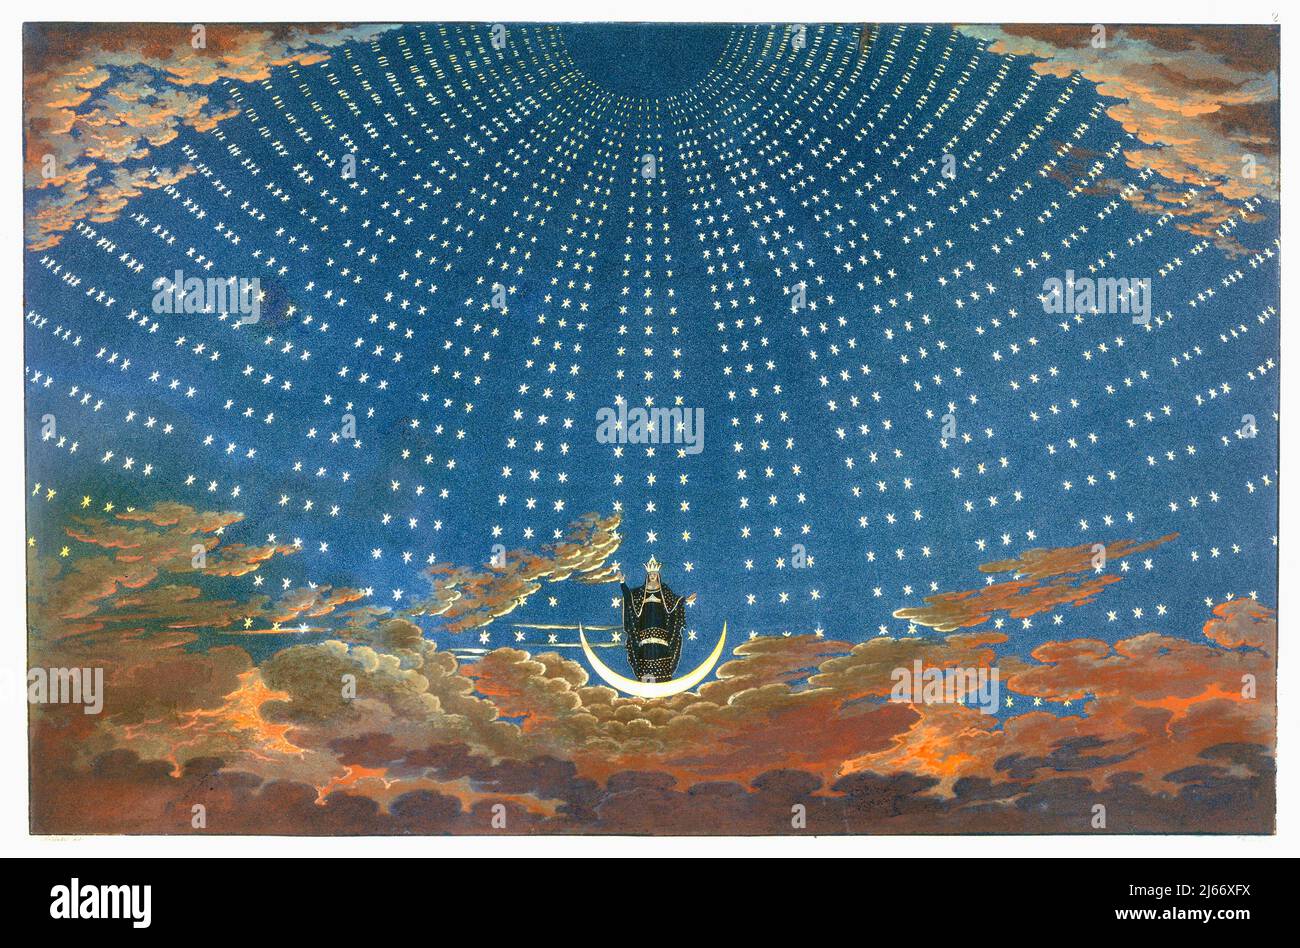 Karl Friedrich Schinkel - Design for The Magic Flute; The Hall of Stars in the Palace of the Queen of the Night, Act 1, Scene 6 Stock Photo